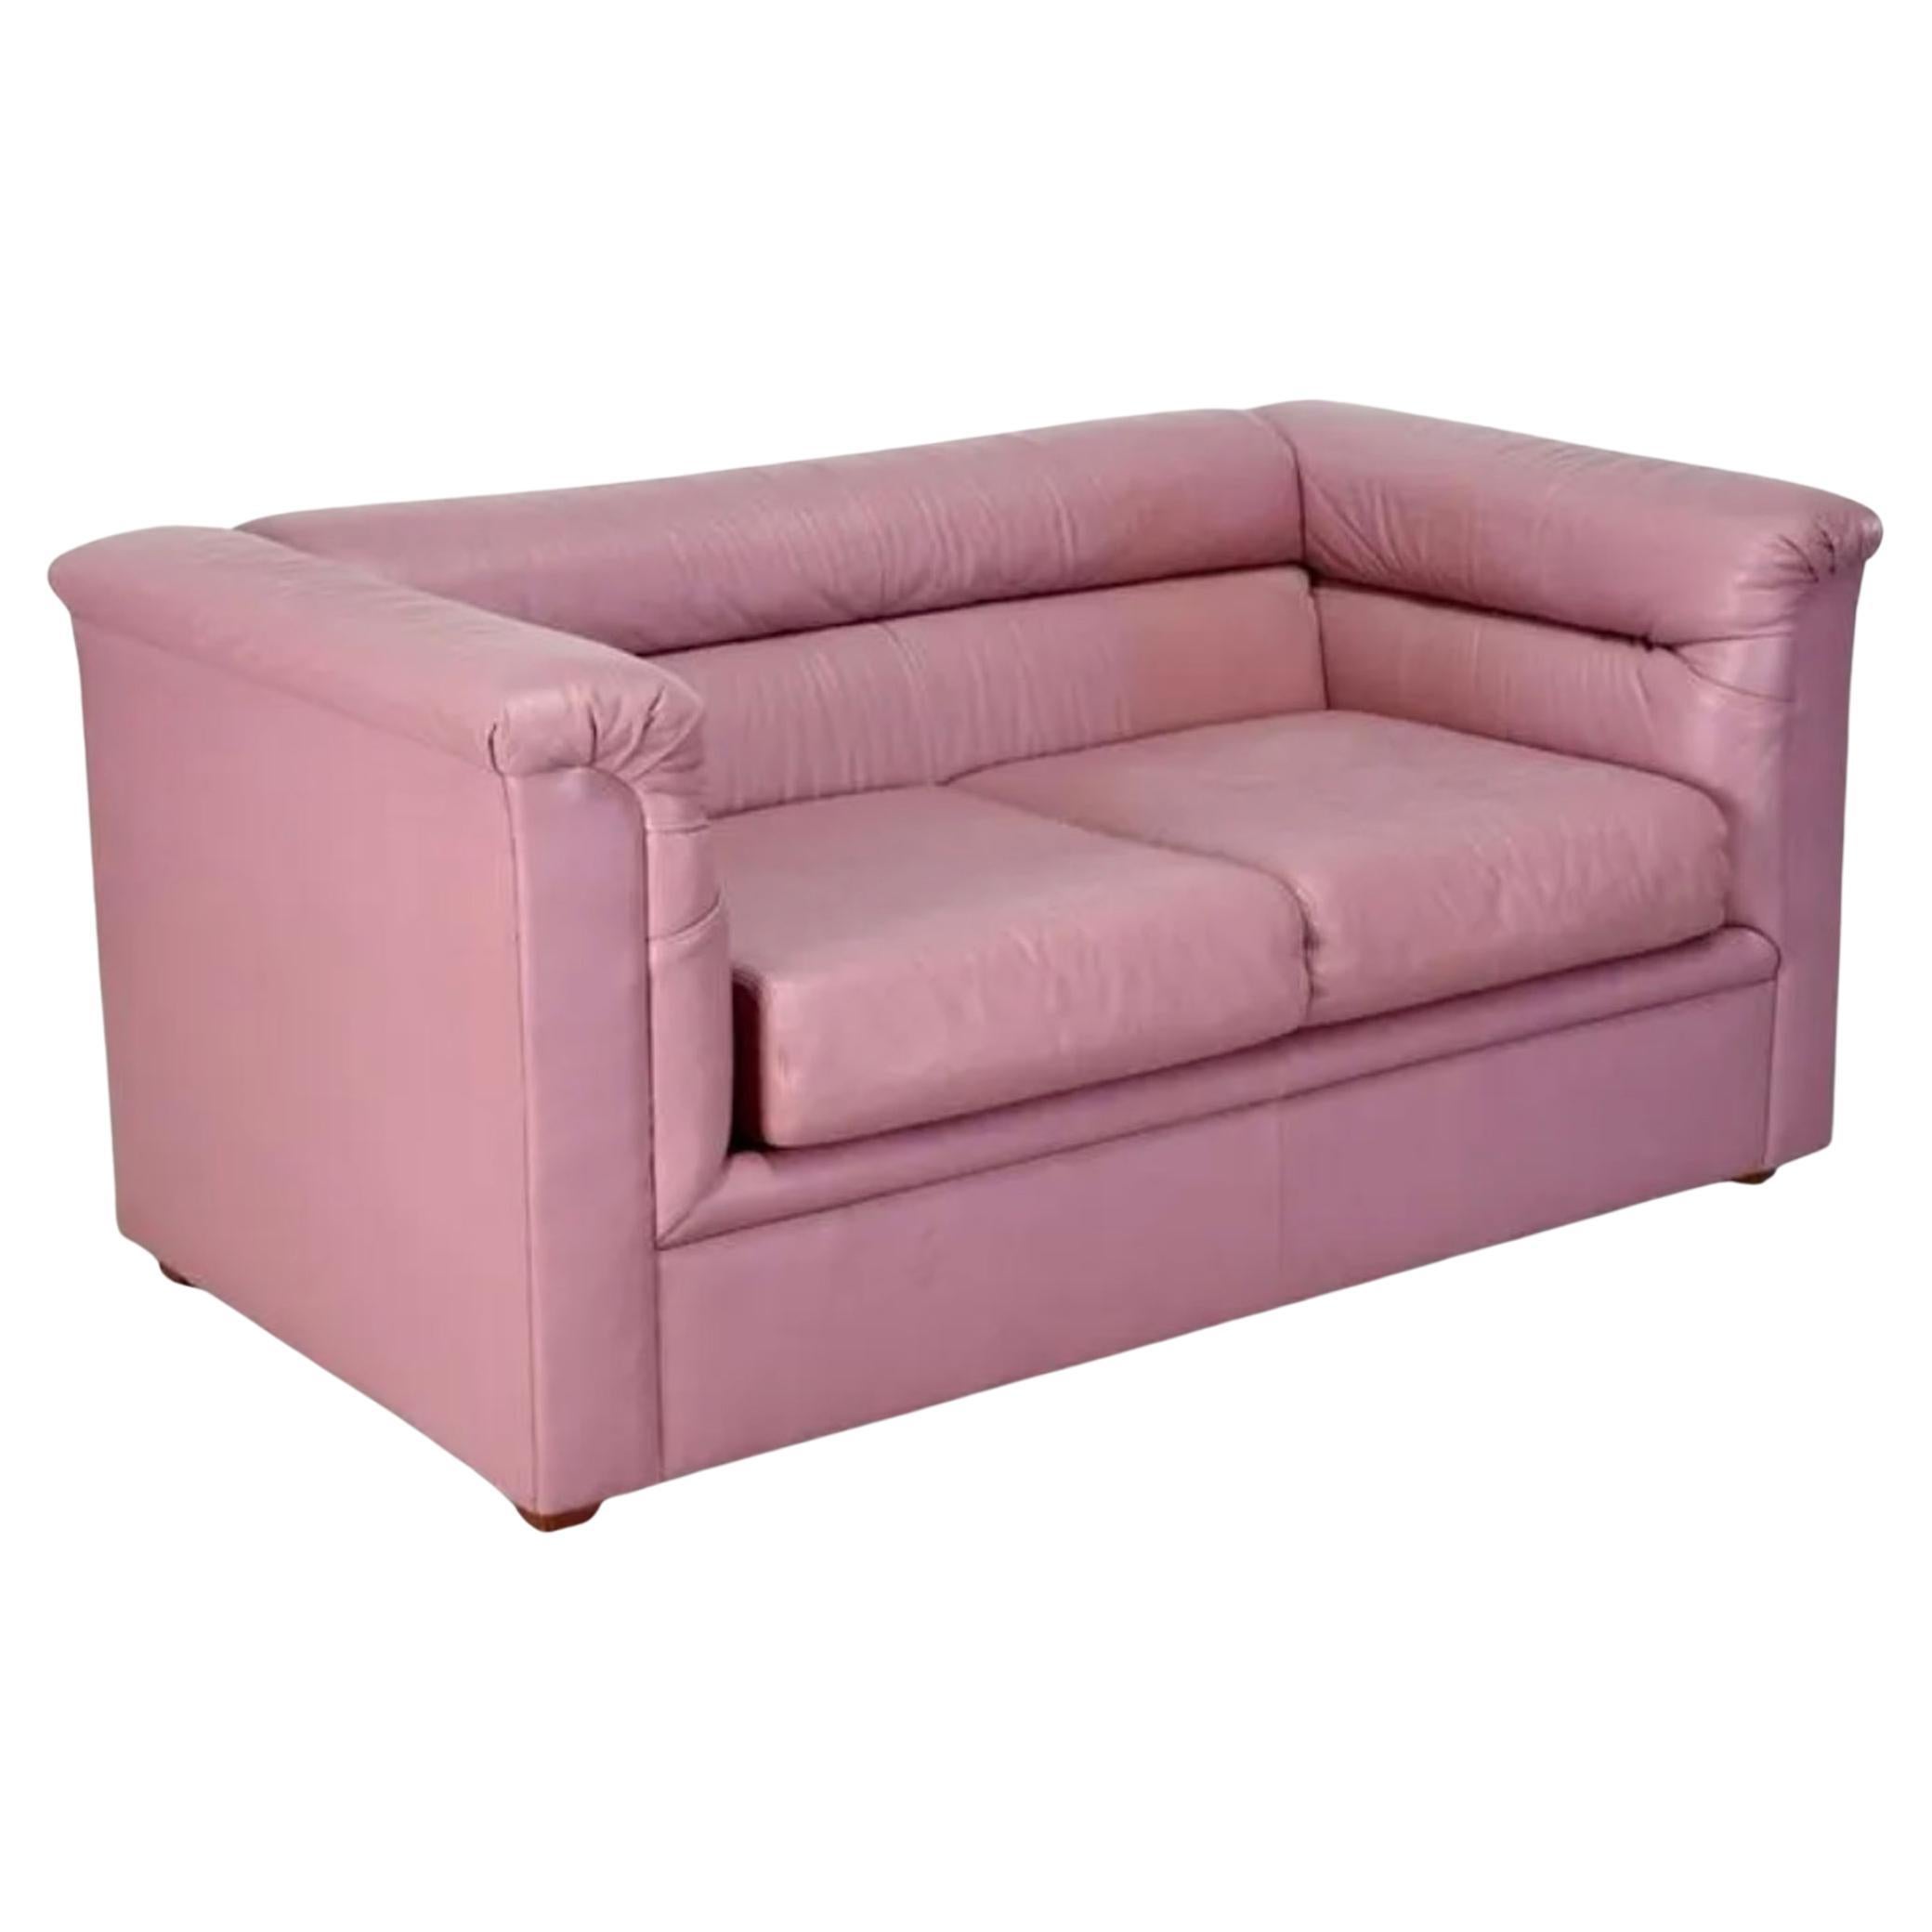 Midcentury Post Modern 2 Seat Mauve Pink Leather Puffy Sofa 1980s Selig For Sale